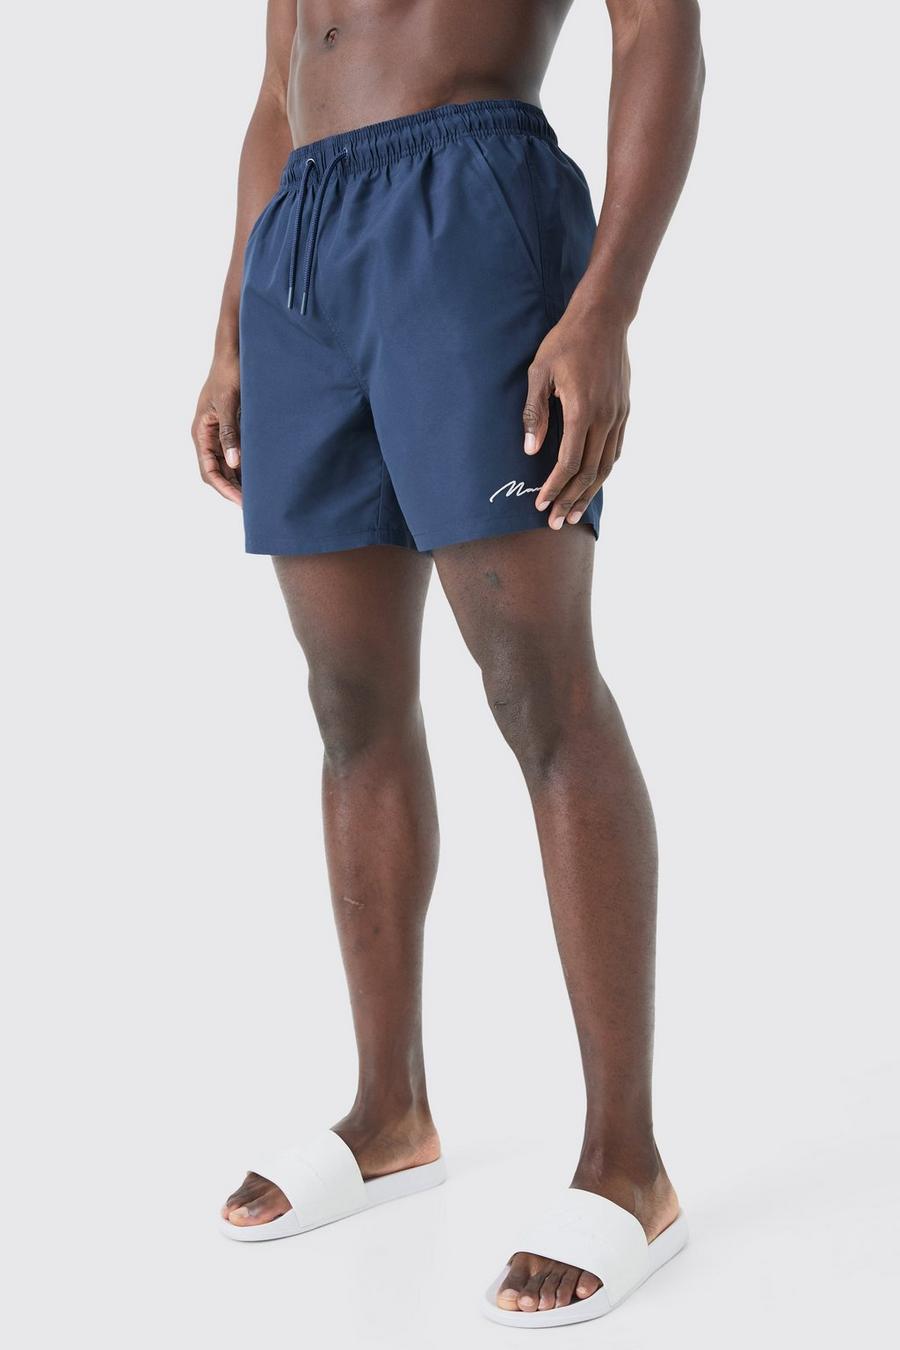 Costume a pantaloncino medio con firma Man, Navy image number 1